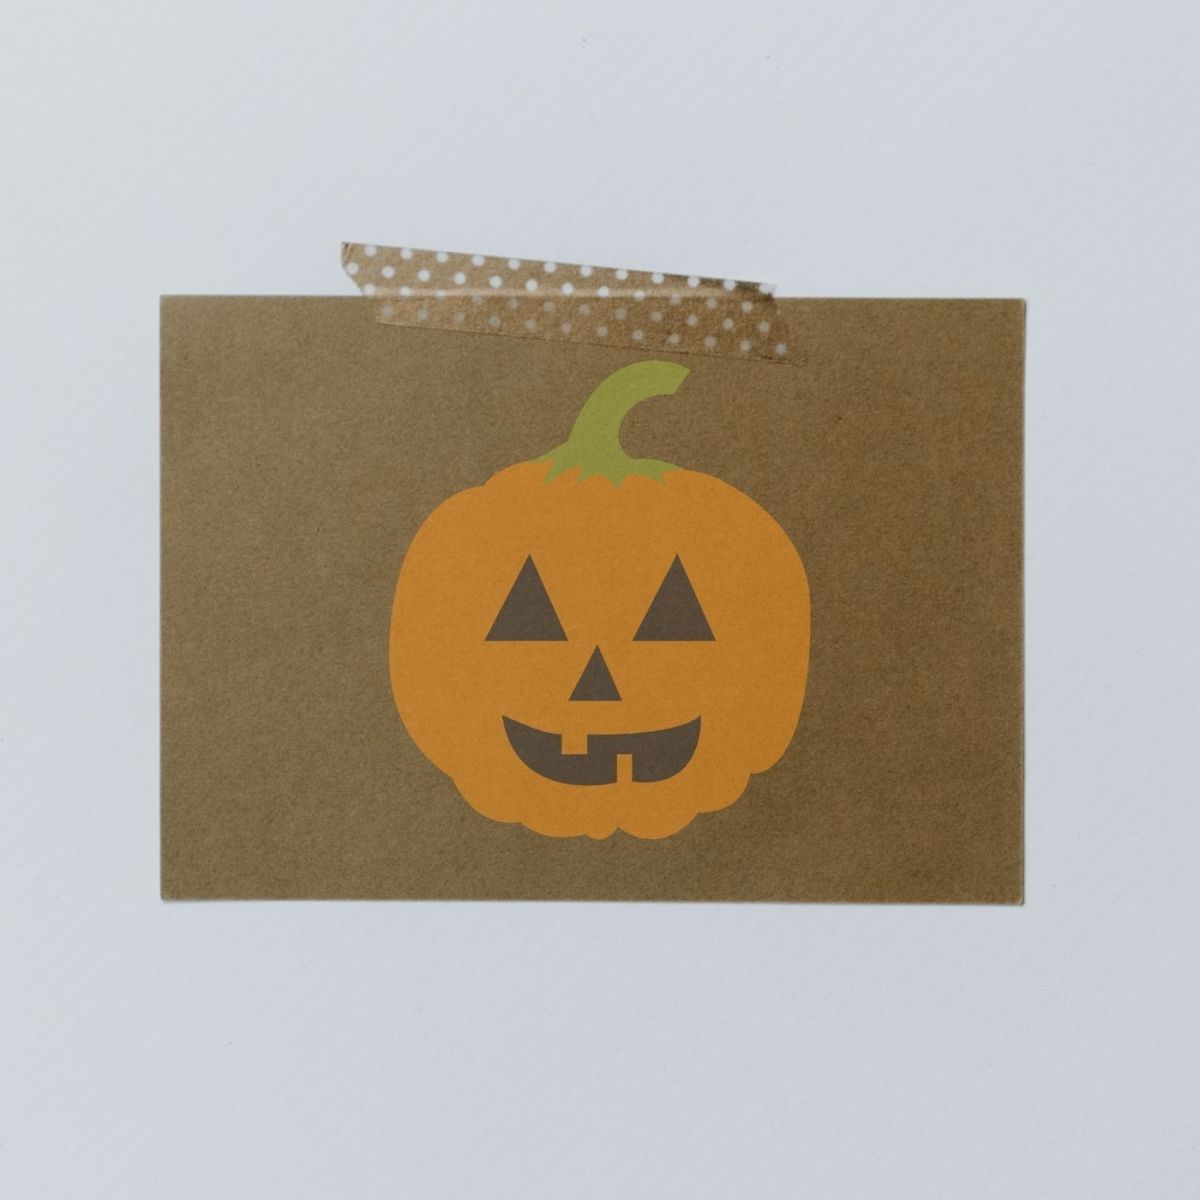 Send some spooky cards this Halloween!